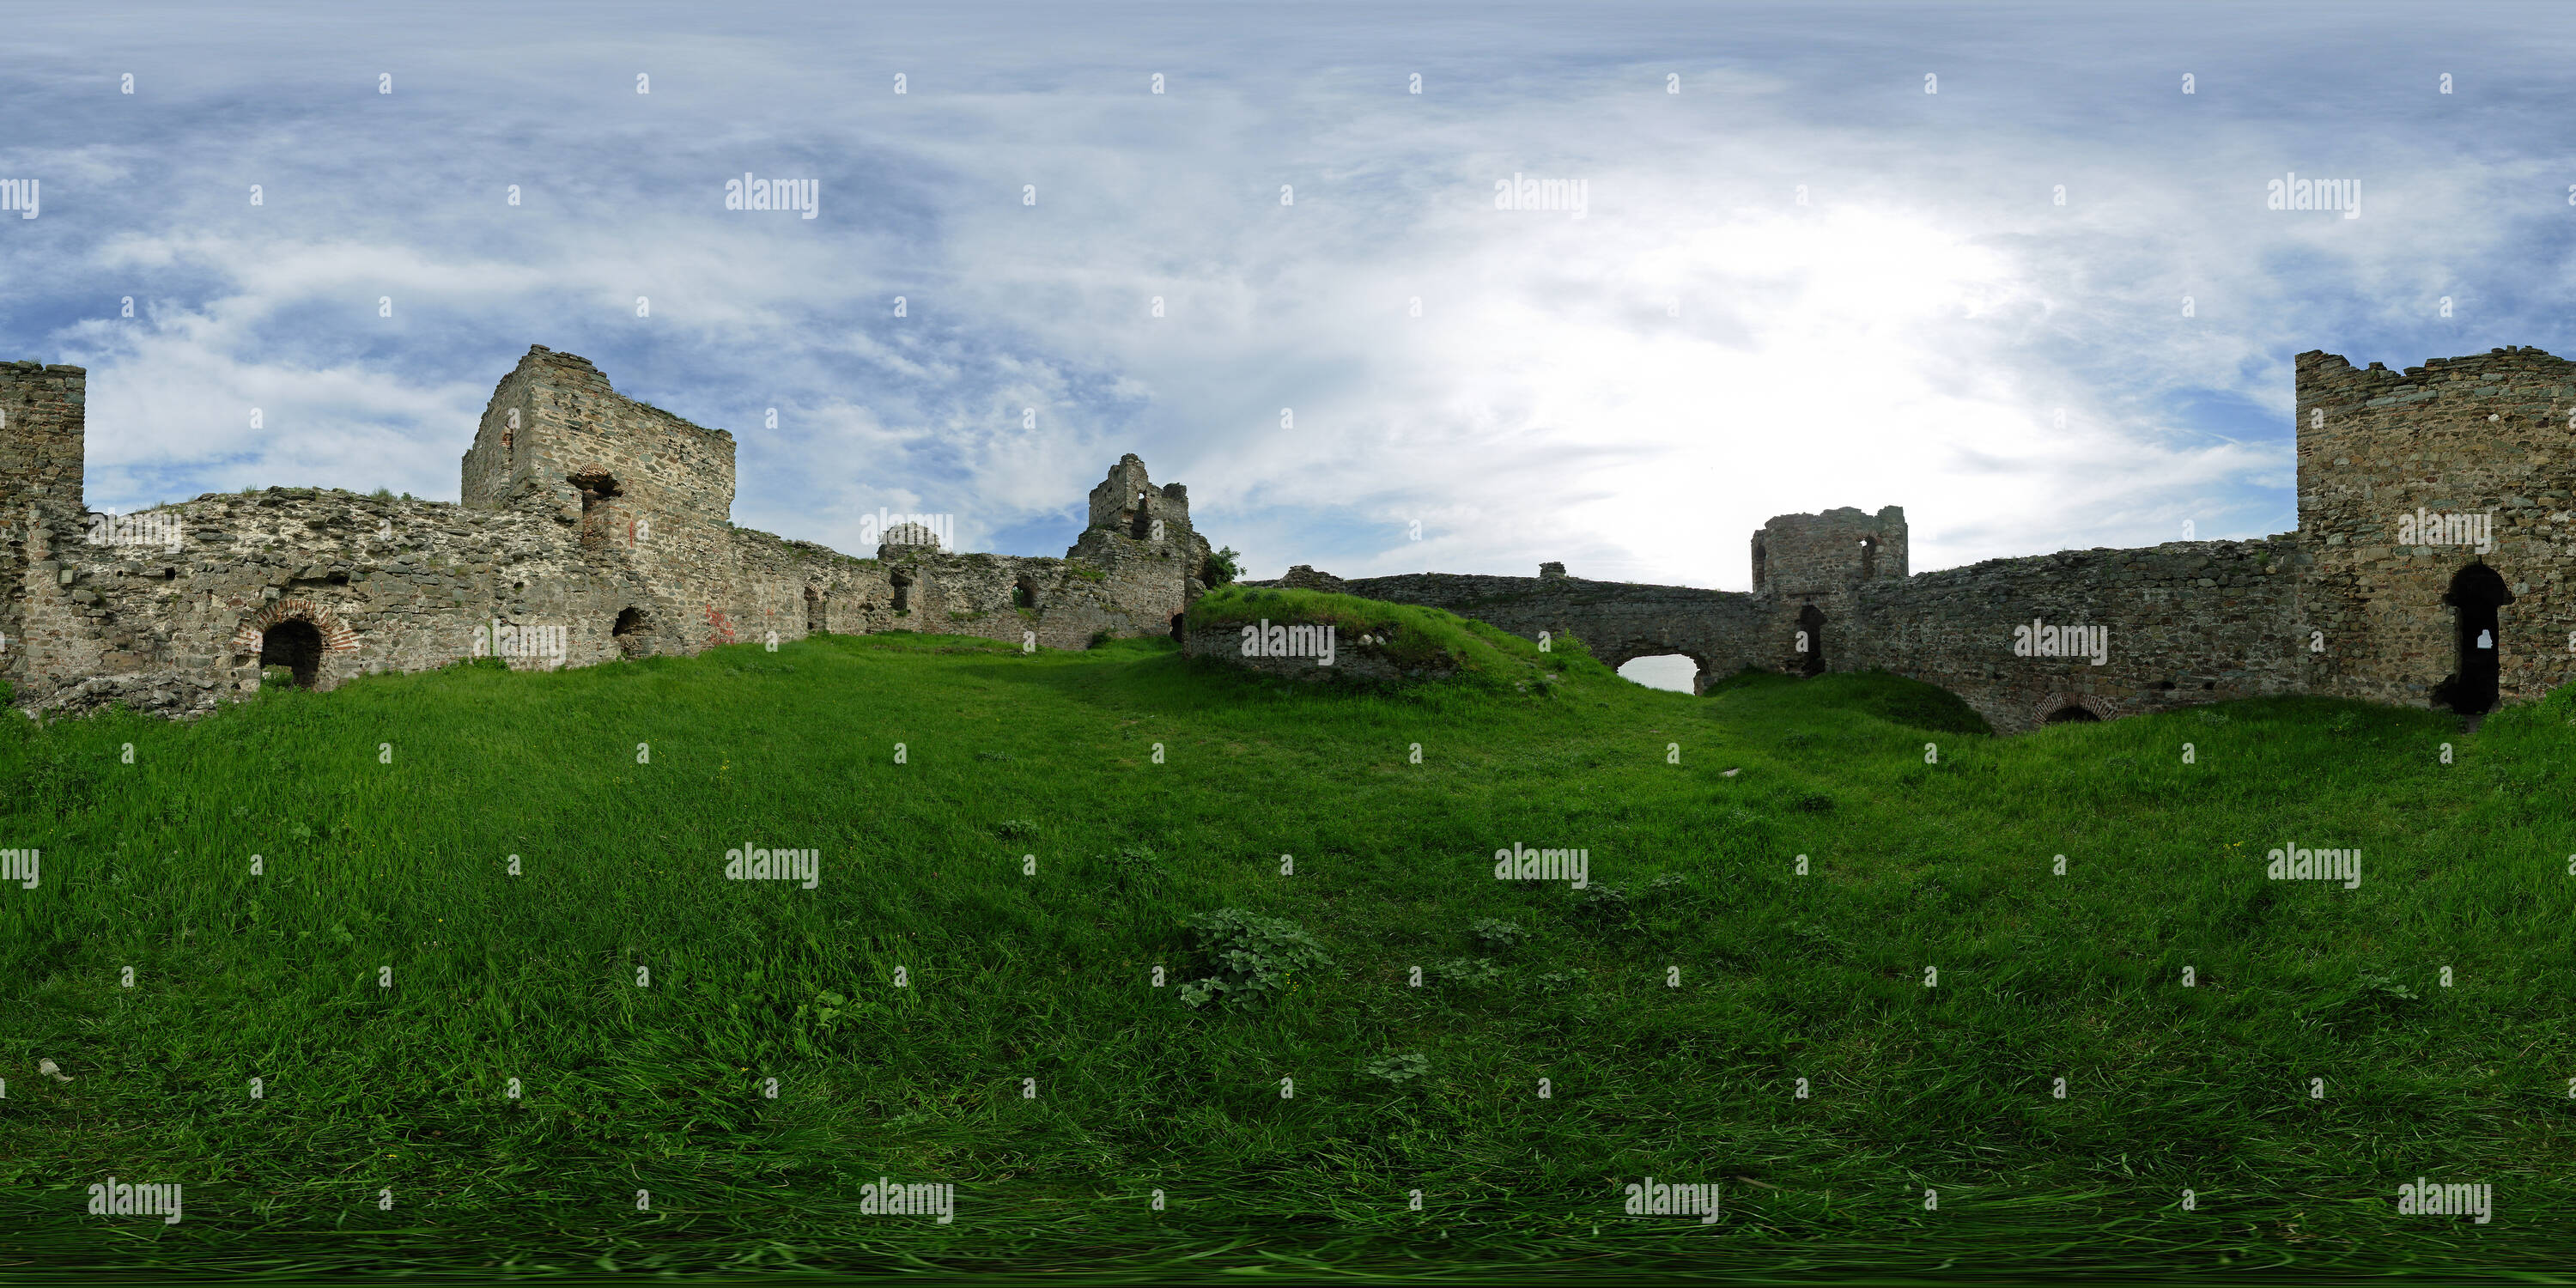 360 degree panoramic view of Ram fortress